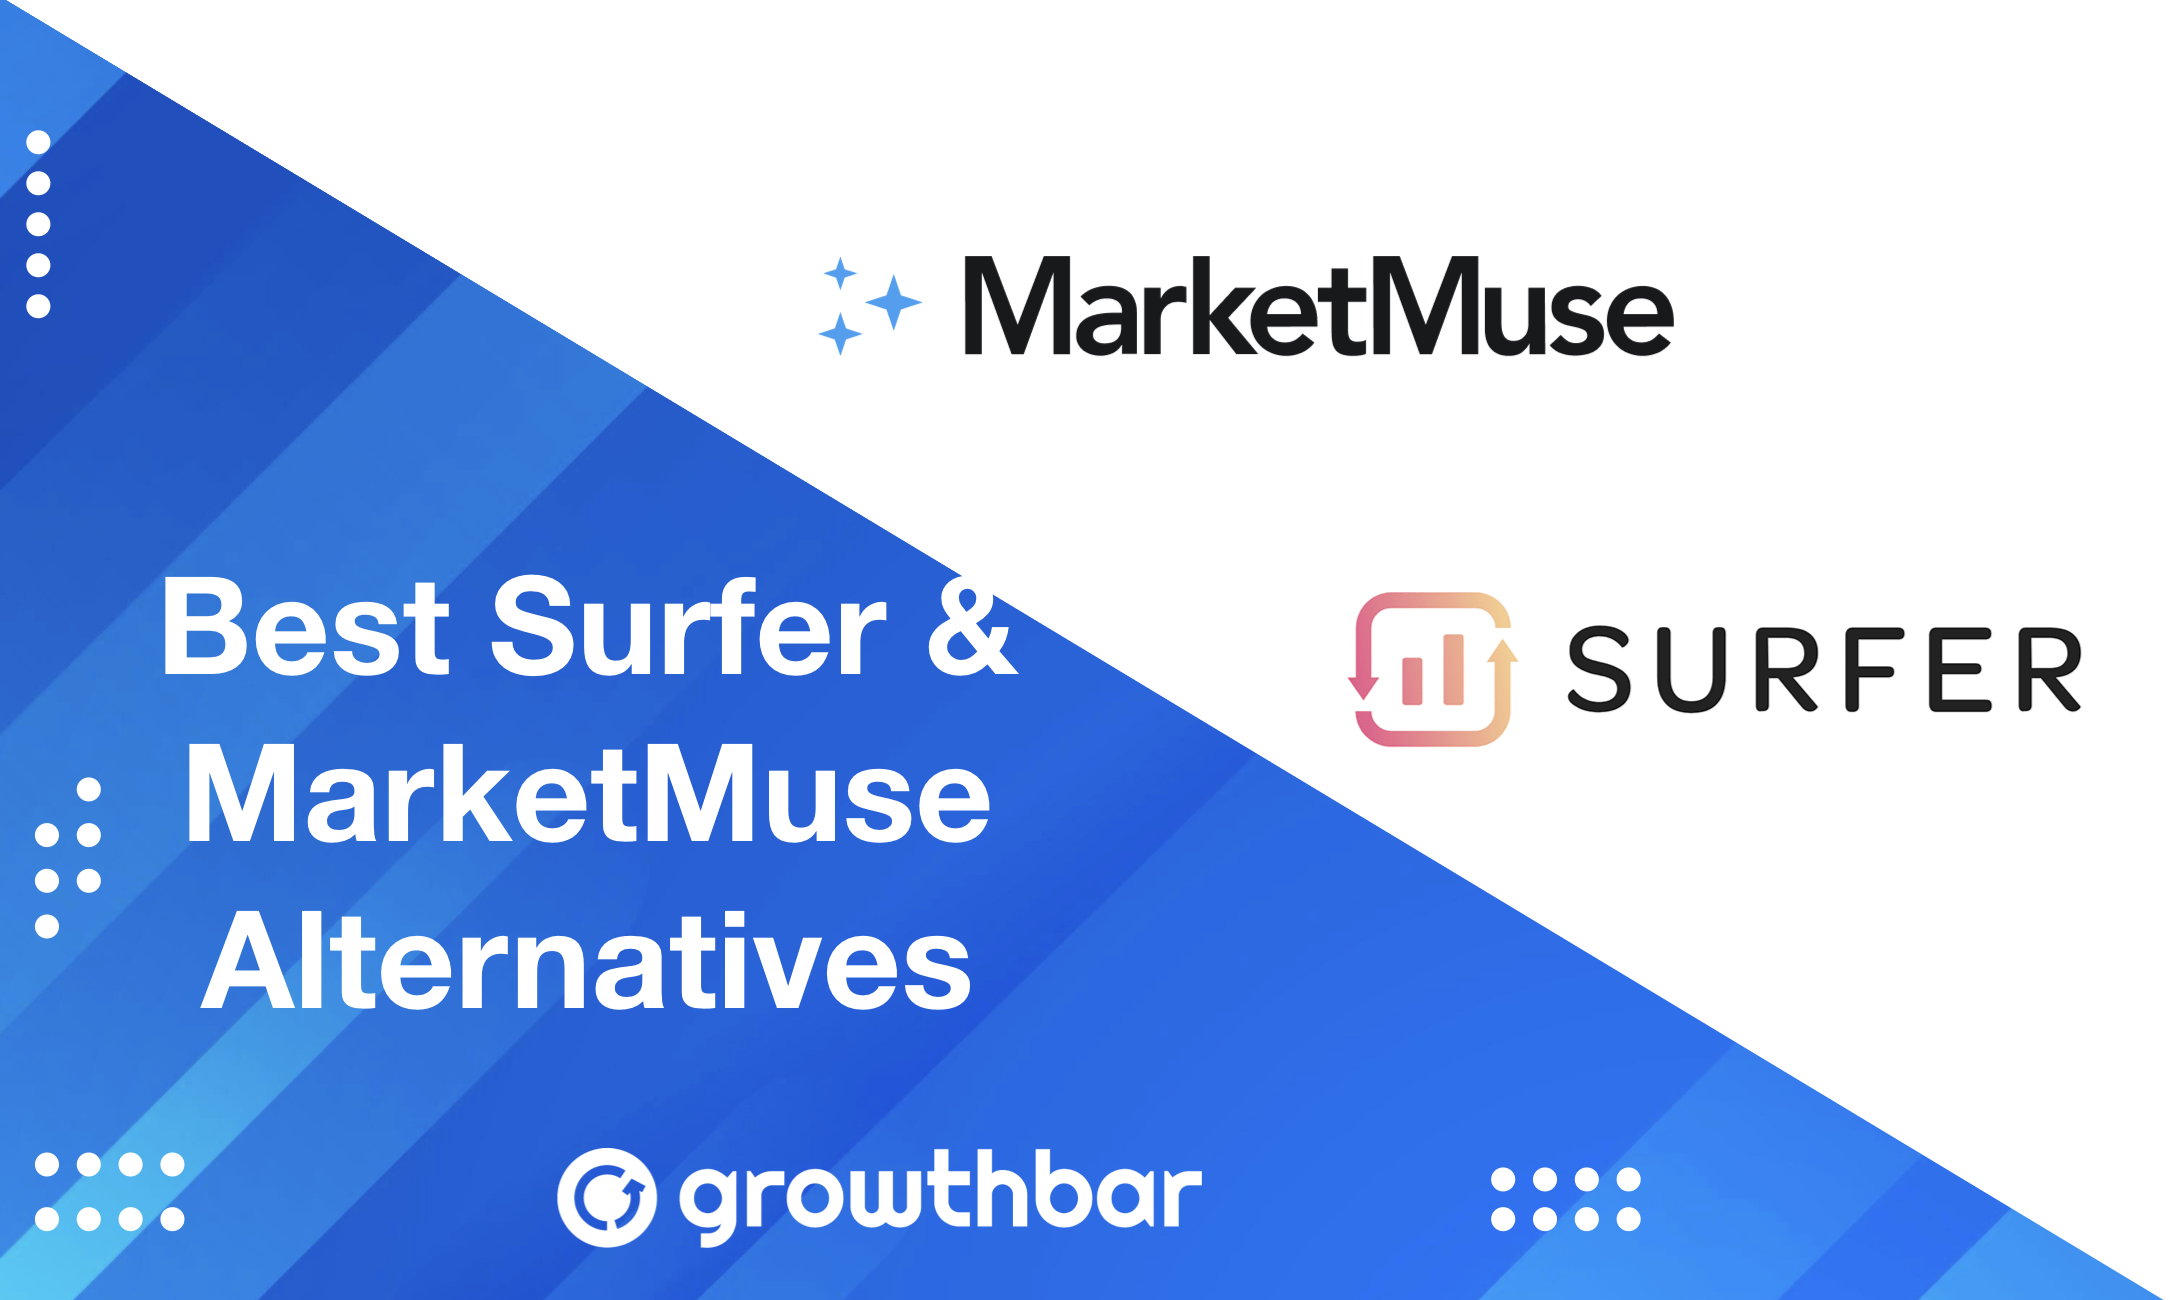 Surfer SEO Group Buy Account $15/month